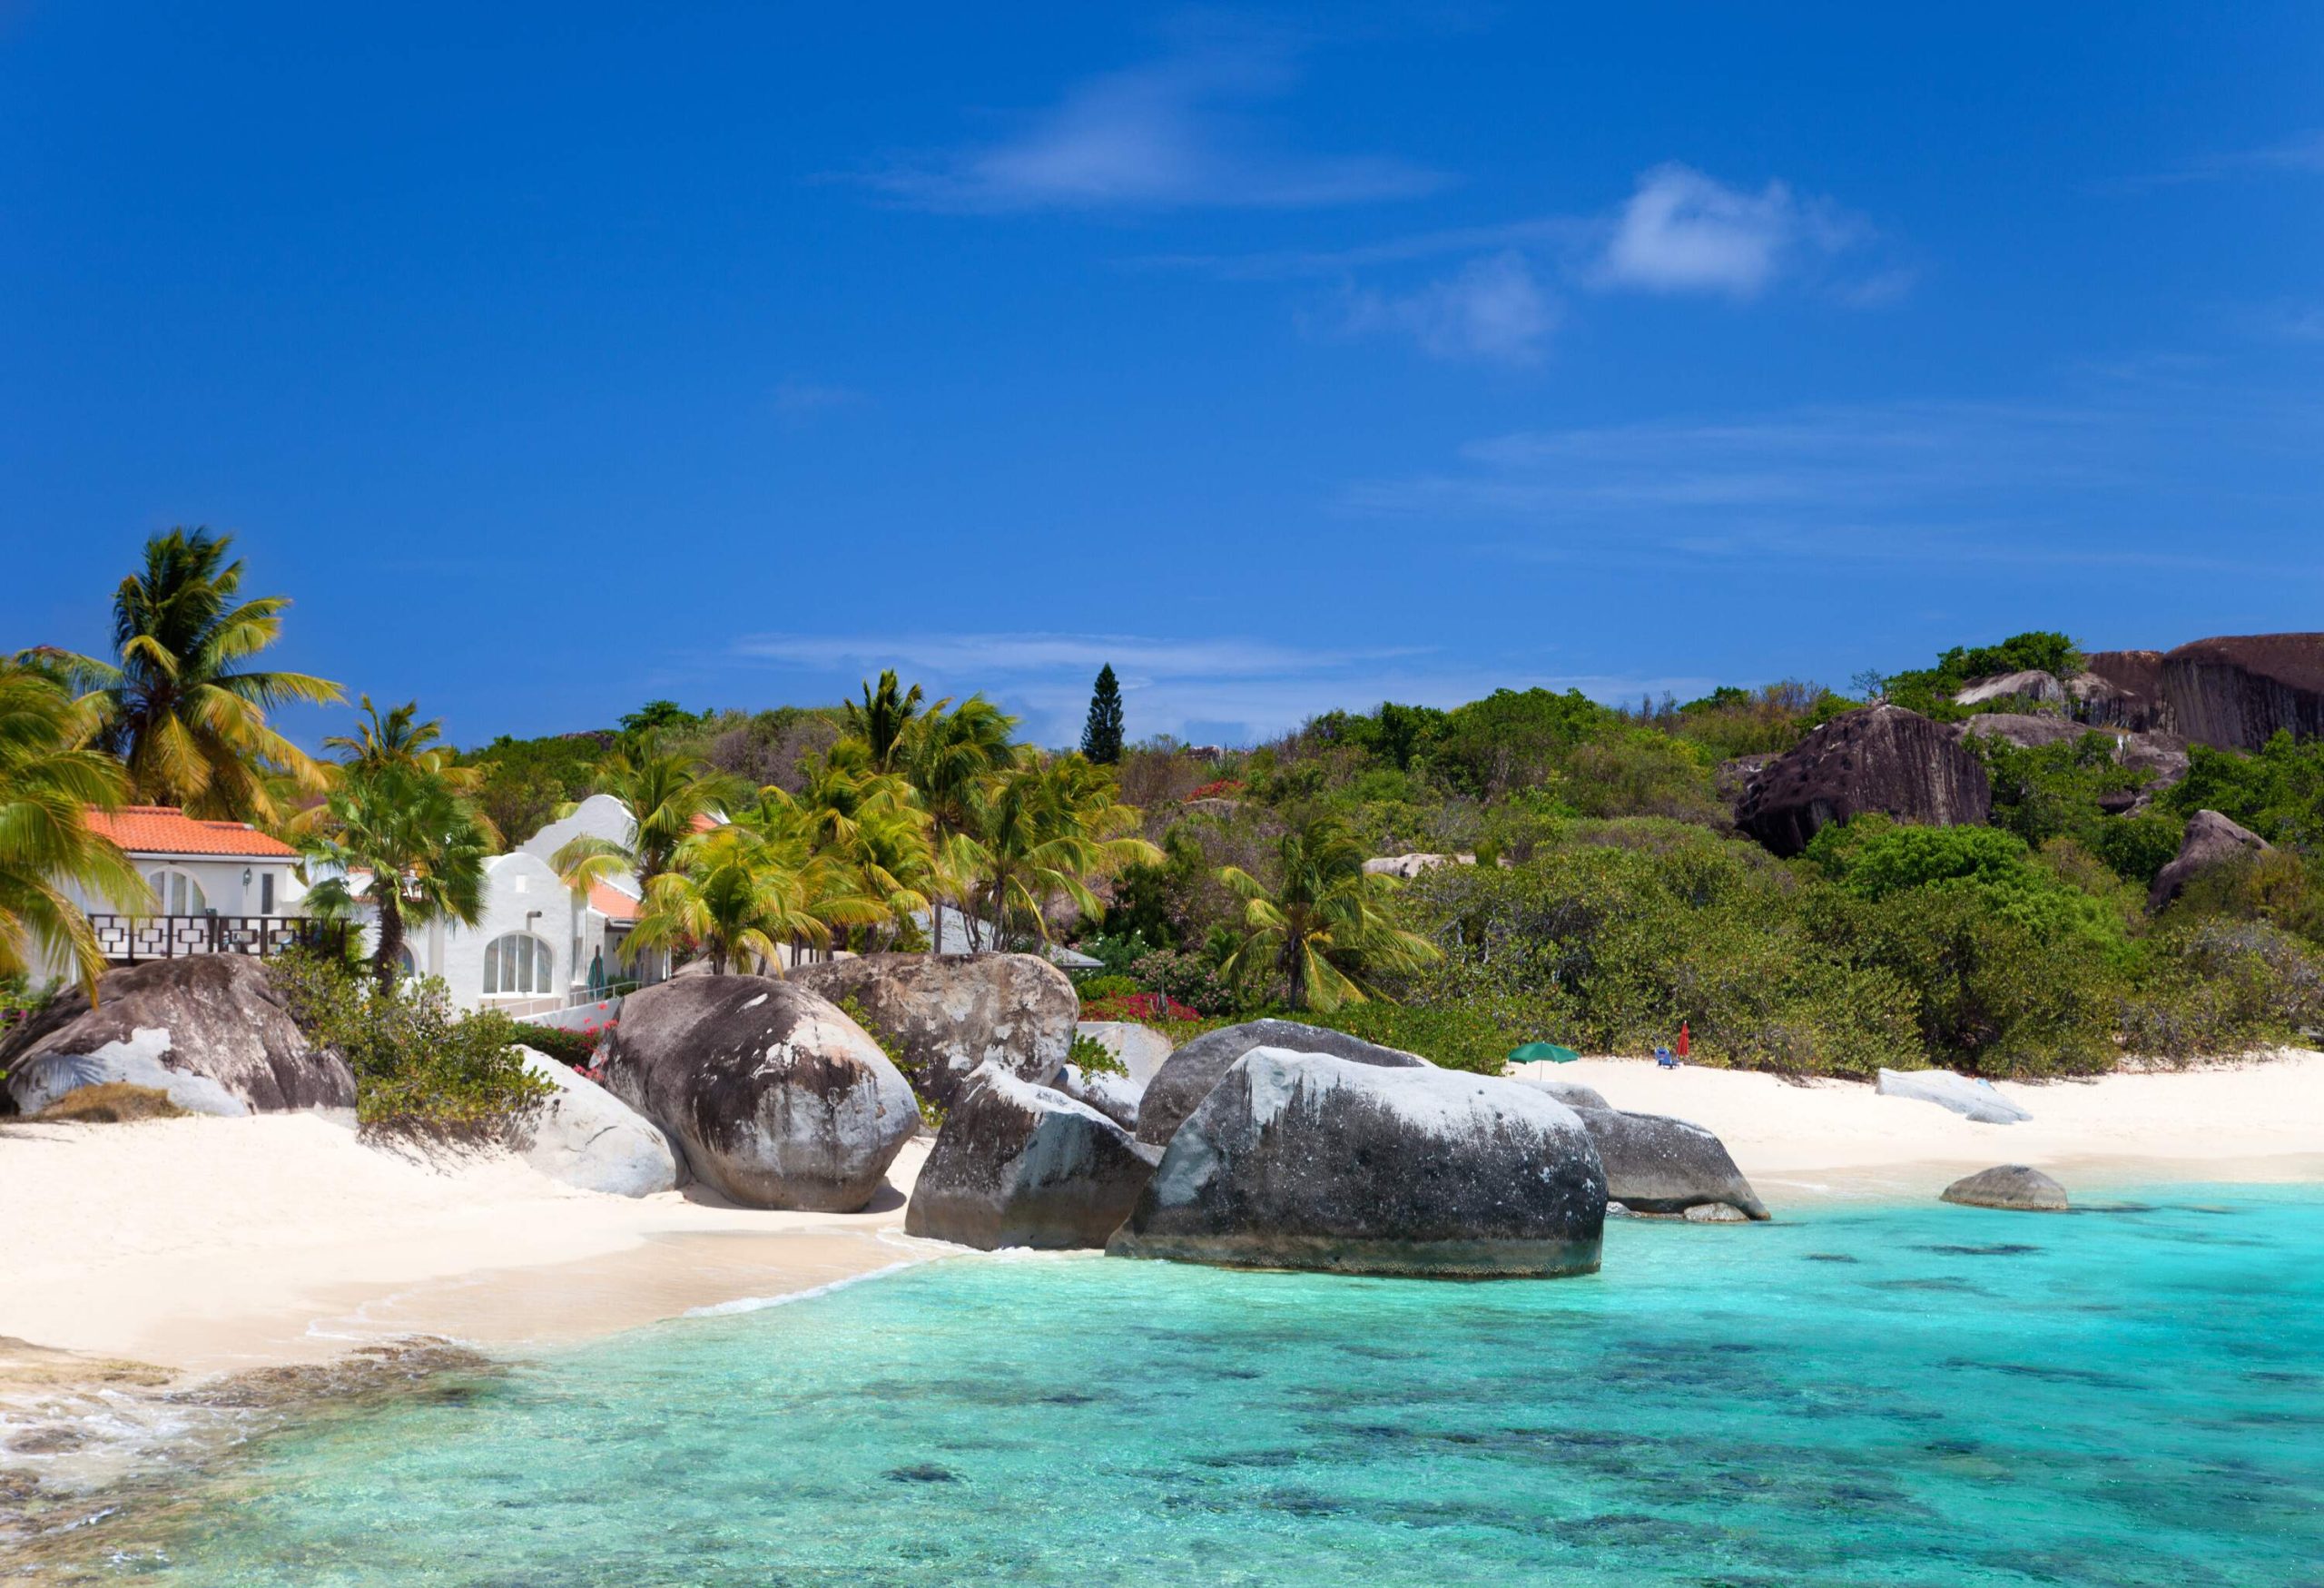 Huge boulders scattered along the white sand shore, with beach houses nestled amidst tall green trees, all surrounded by the captivating turquoise sea.